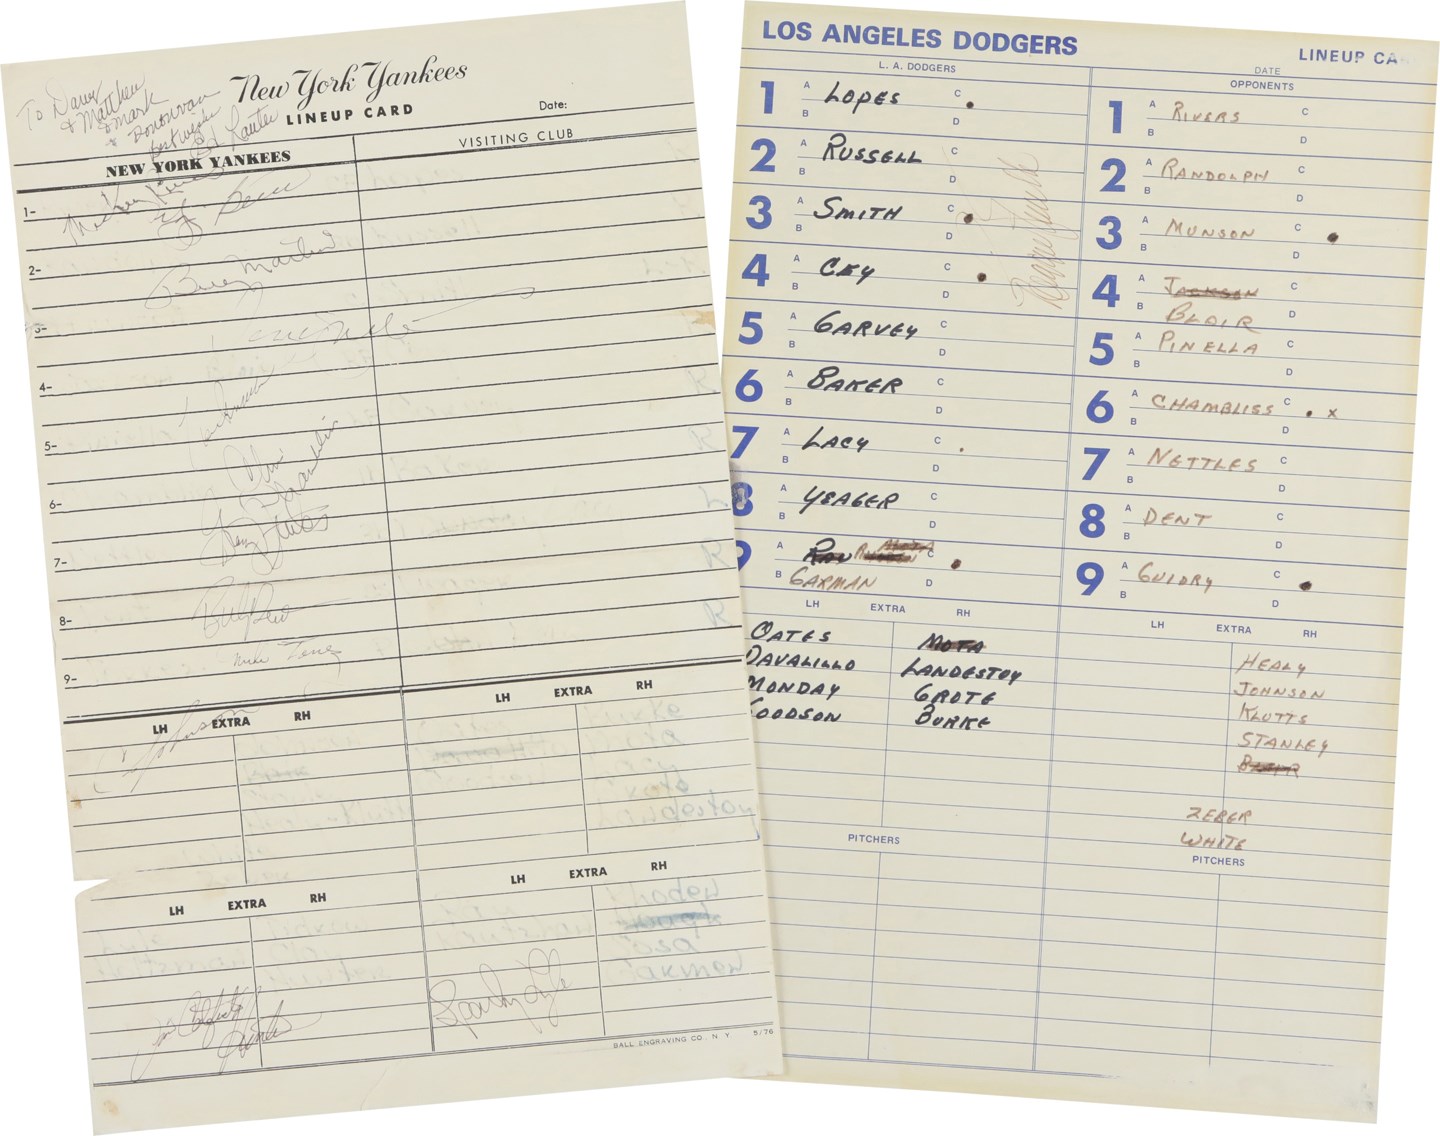 - NY Yankees & LA Dodgers Original 1977 World Series Dugout Lineup Cards - Games 3 & 4 - Signed by Numerous Yankees Players (PSA)